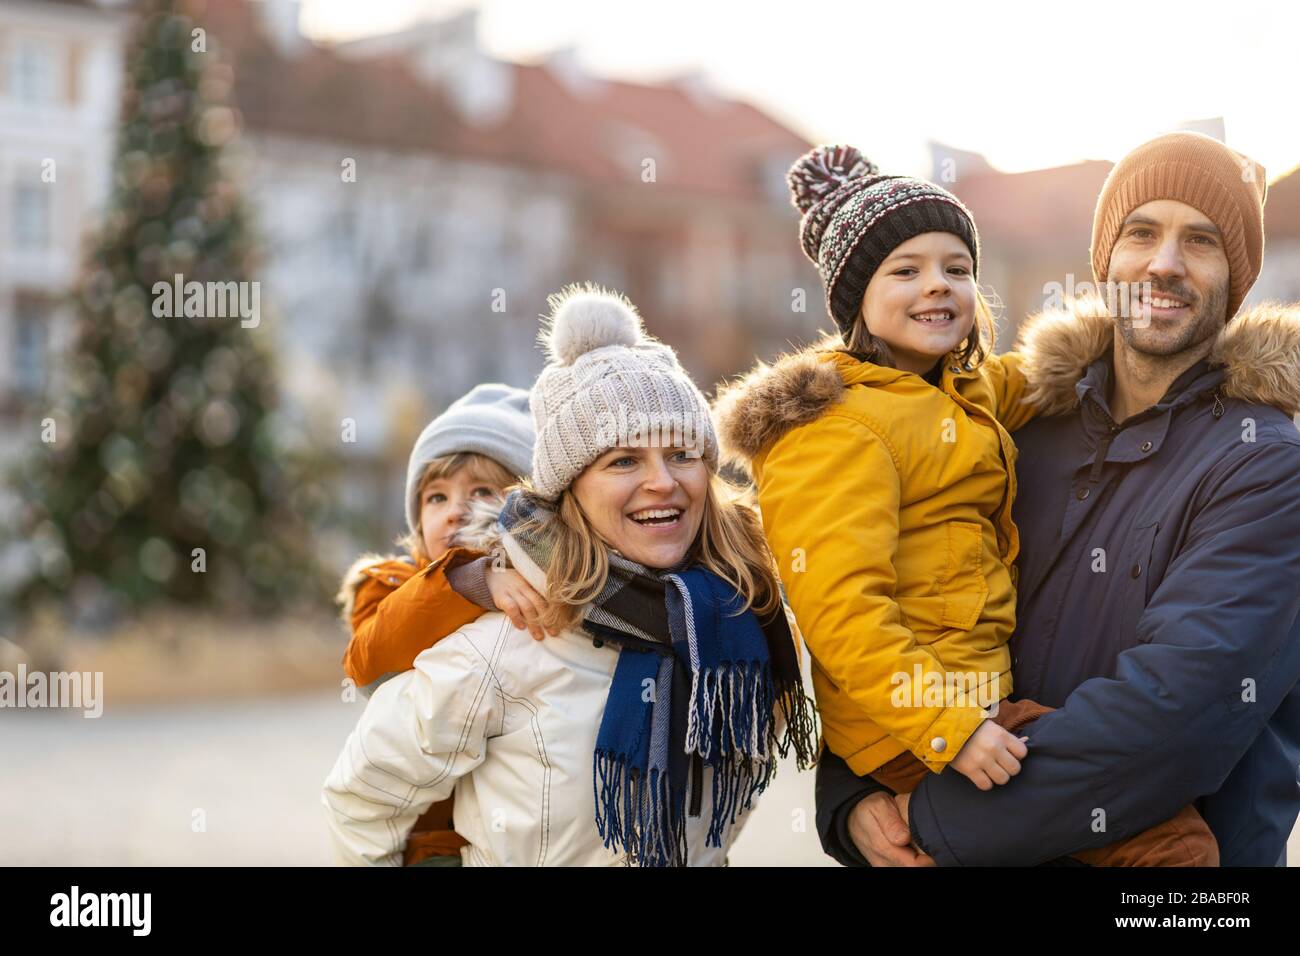 Affectionate young family enjoying their day in a city Stock Photo